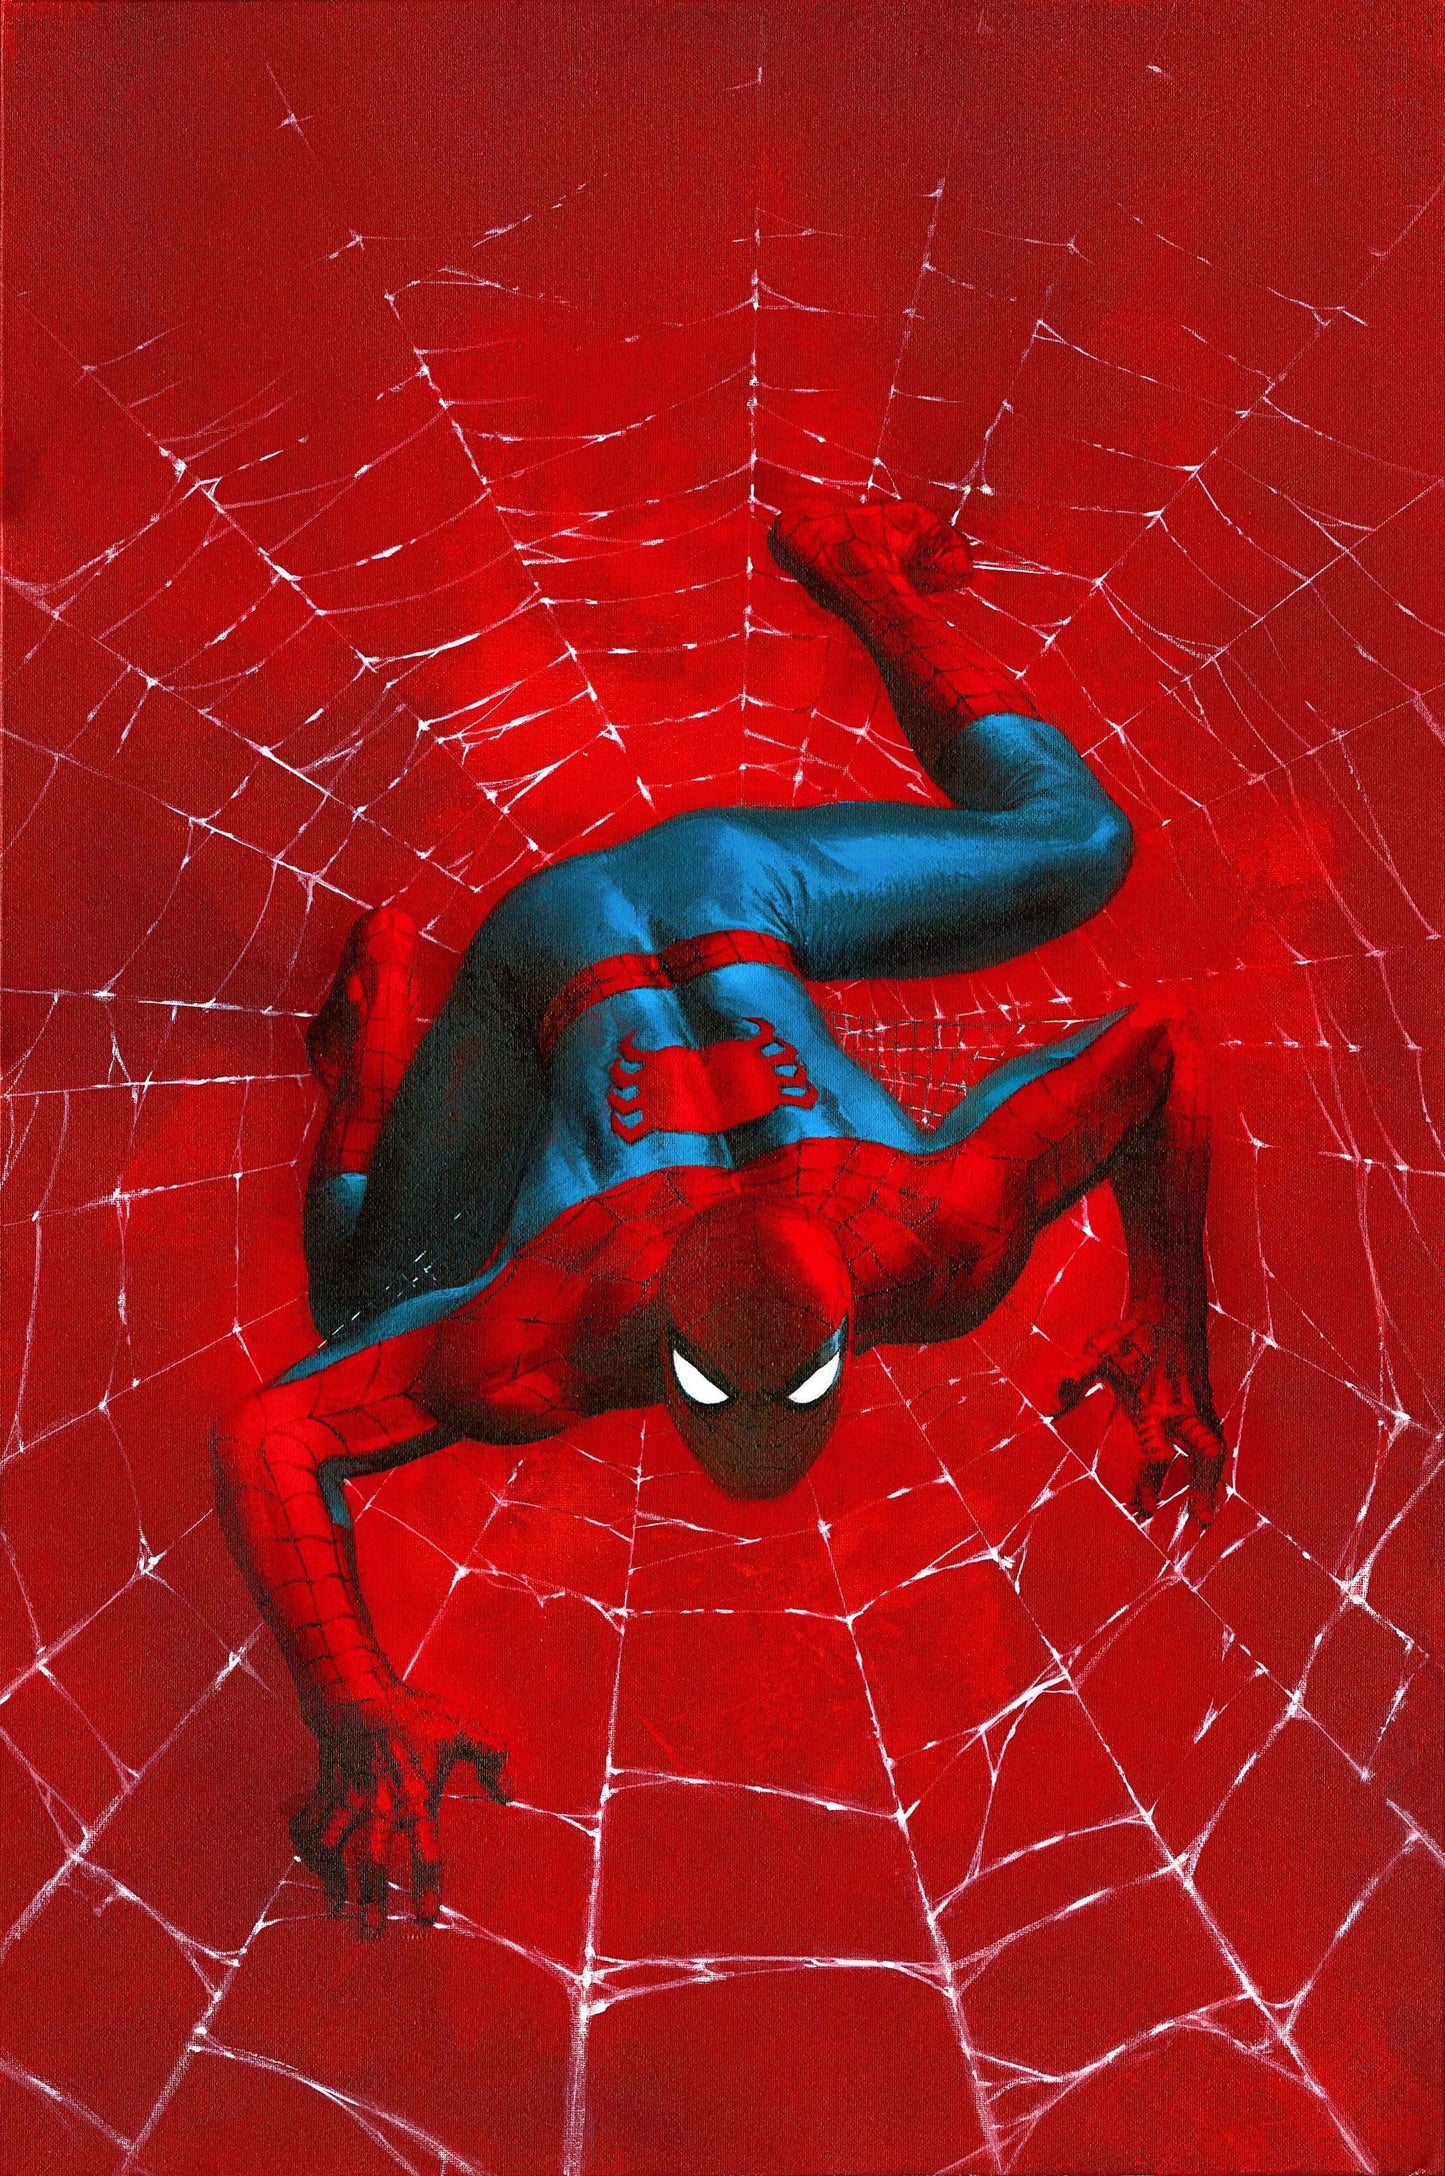 AMAZING SPIDER-MAN #17 GABRIELLE DELL'OTTO MEGACON VIRGIN VARIANT LIMITED TO 500 WITH NUMBERED COA